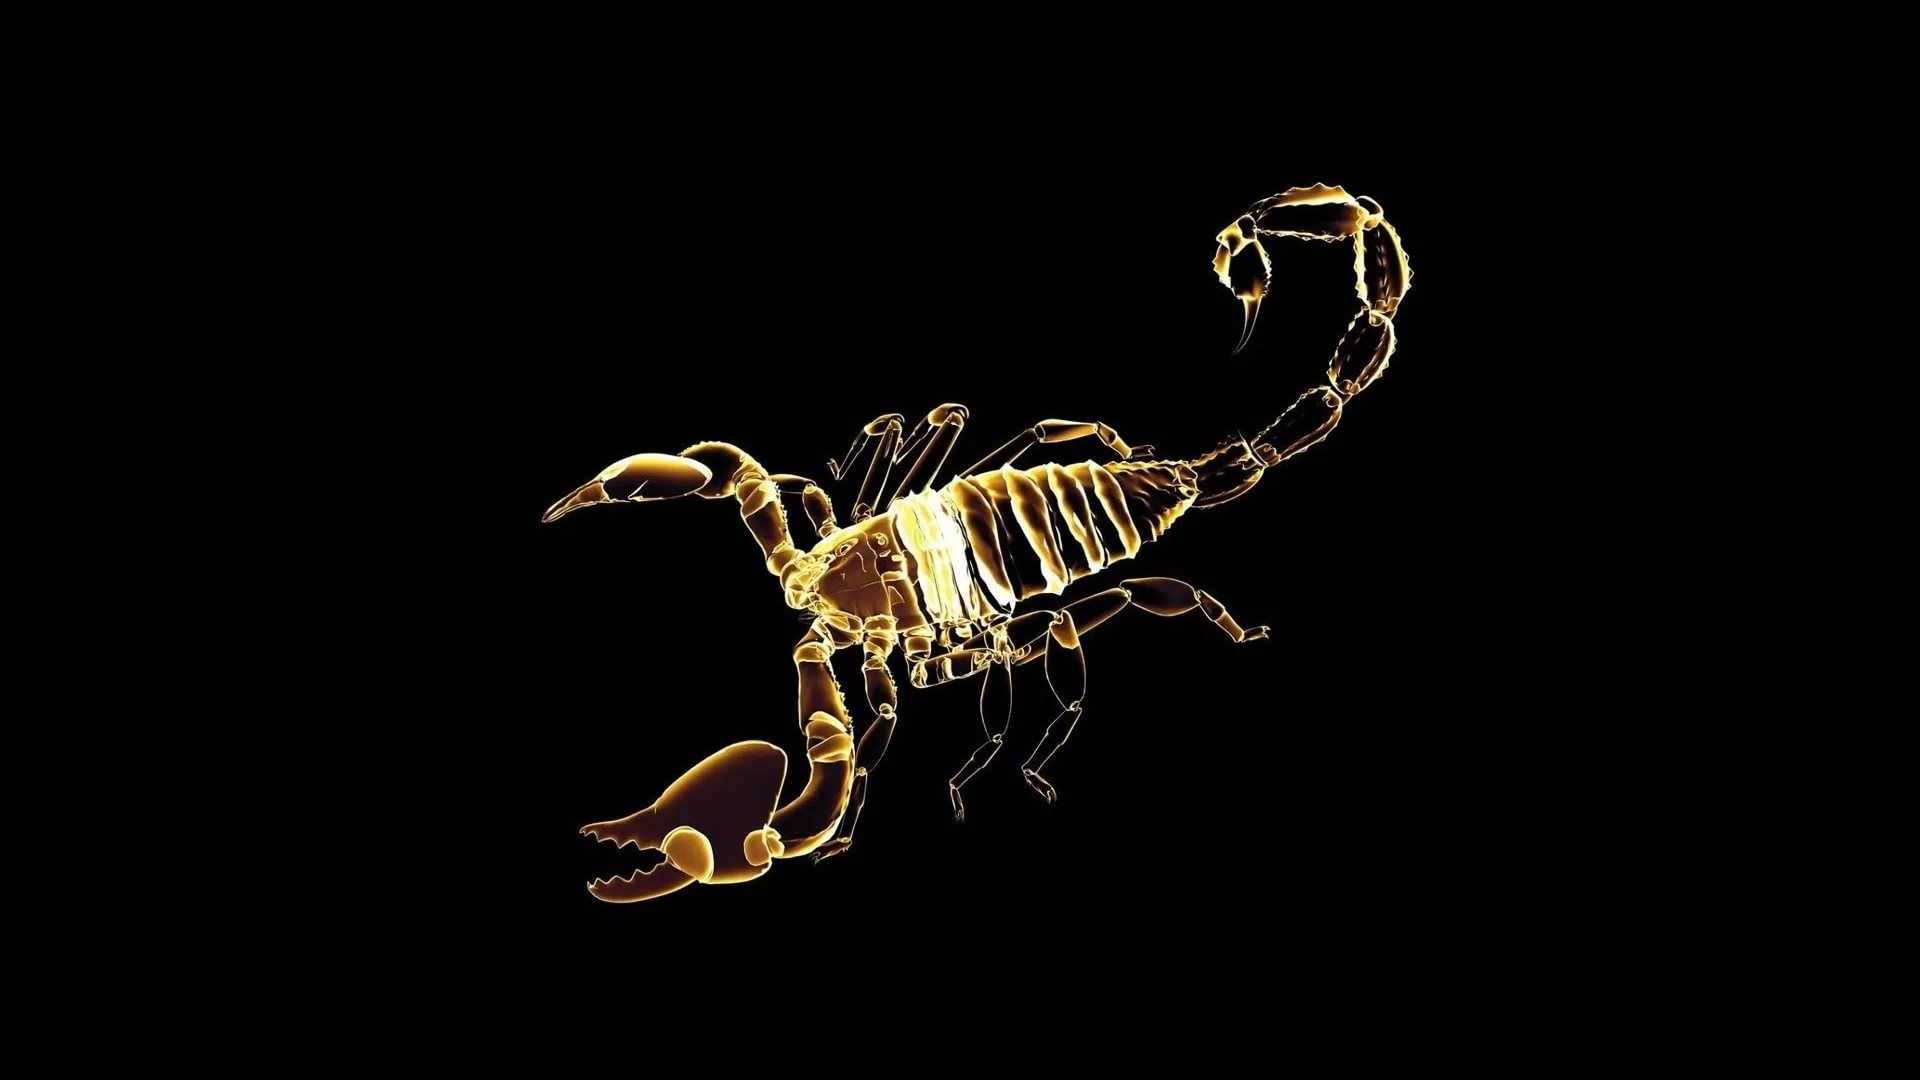 Scorpion 4K wallpapers for your desktop or mobile screen free and easy to  download